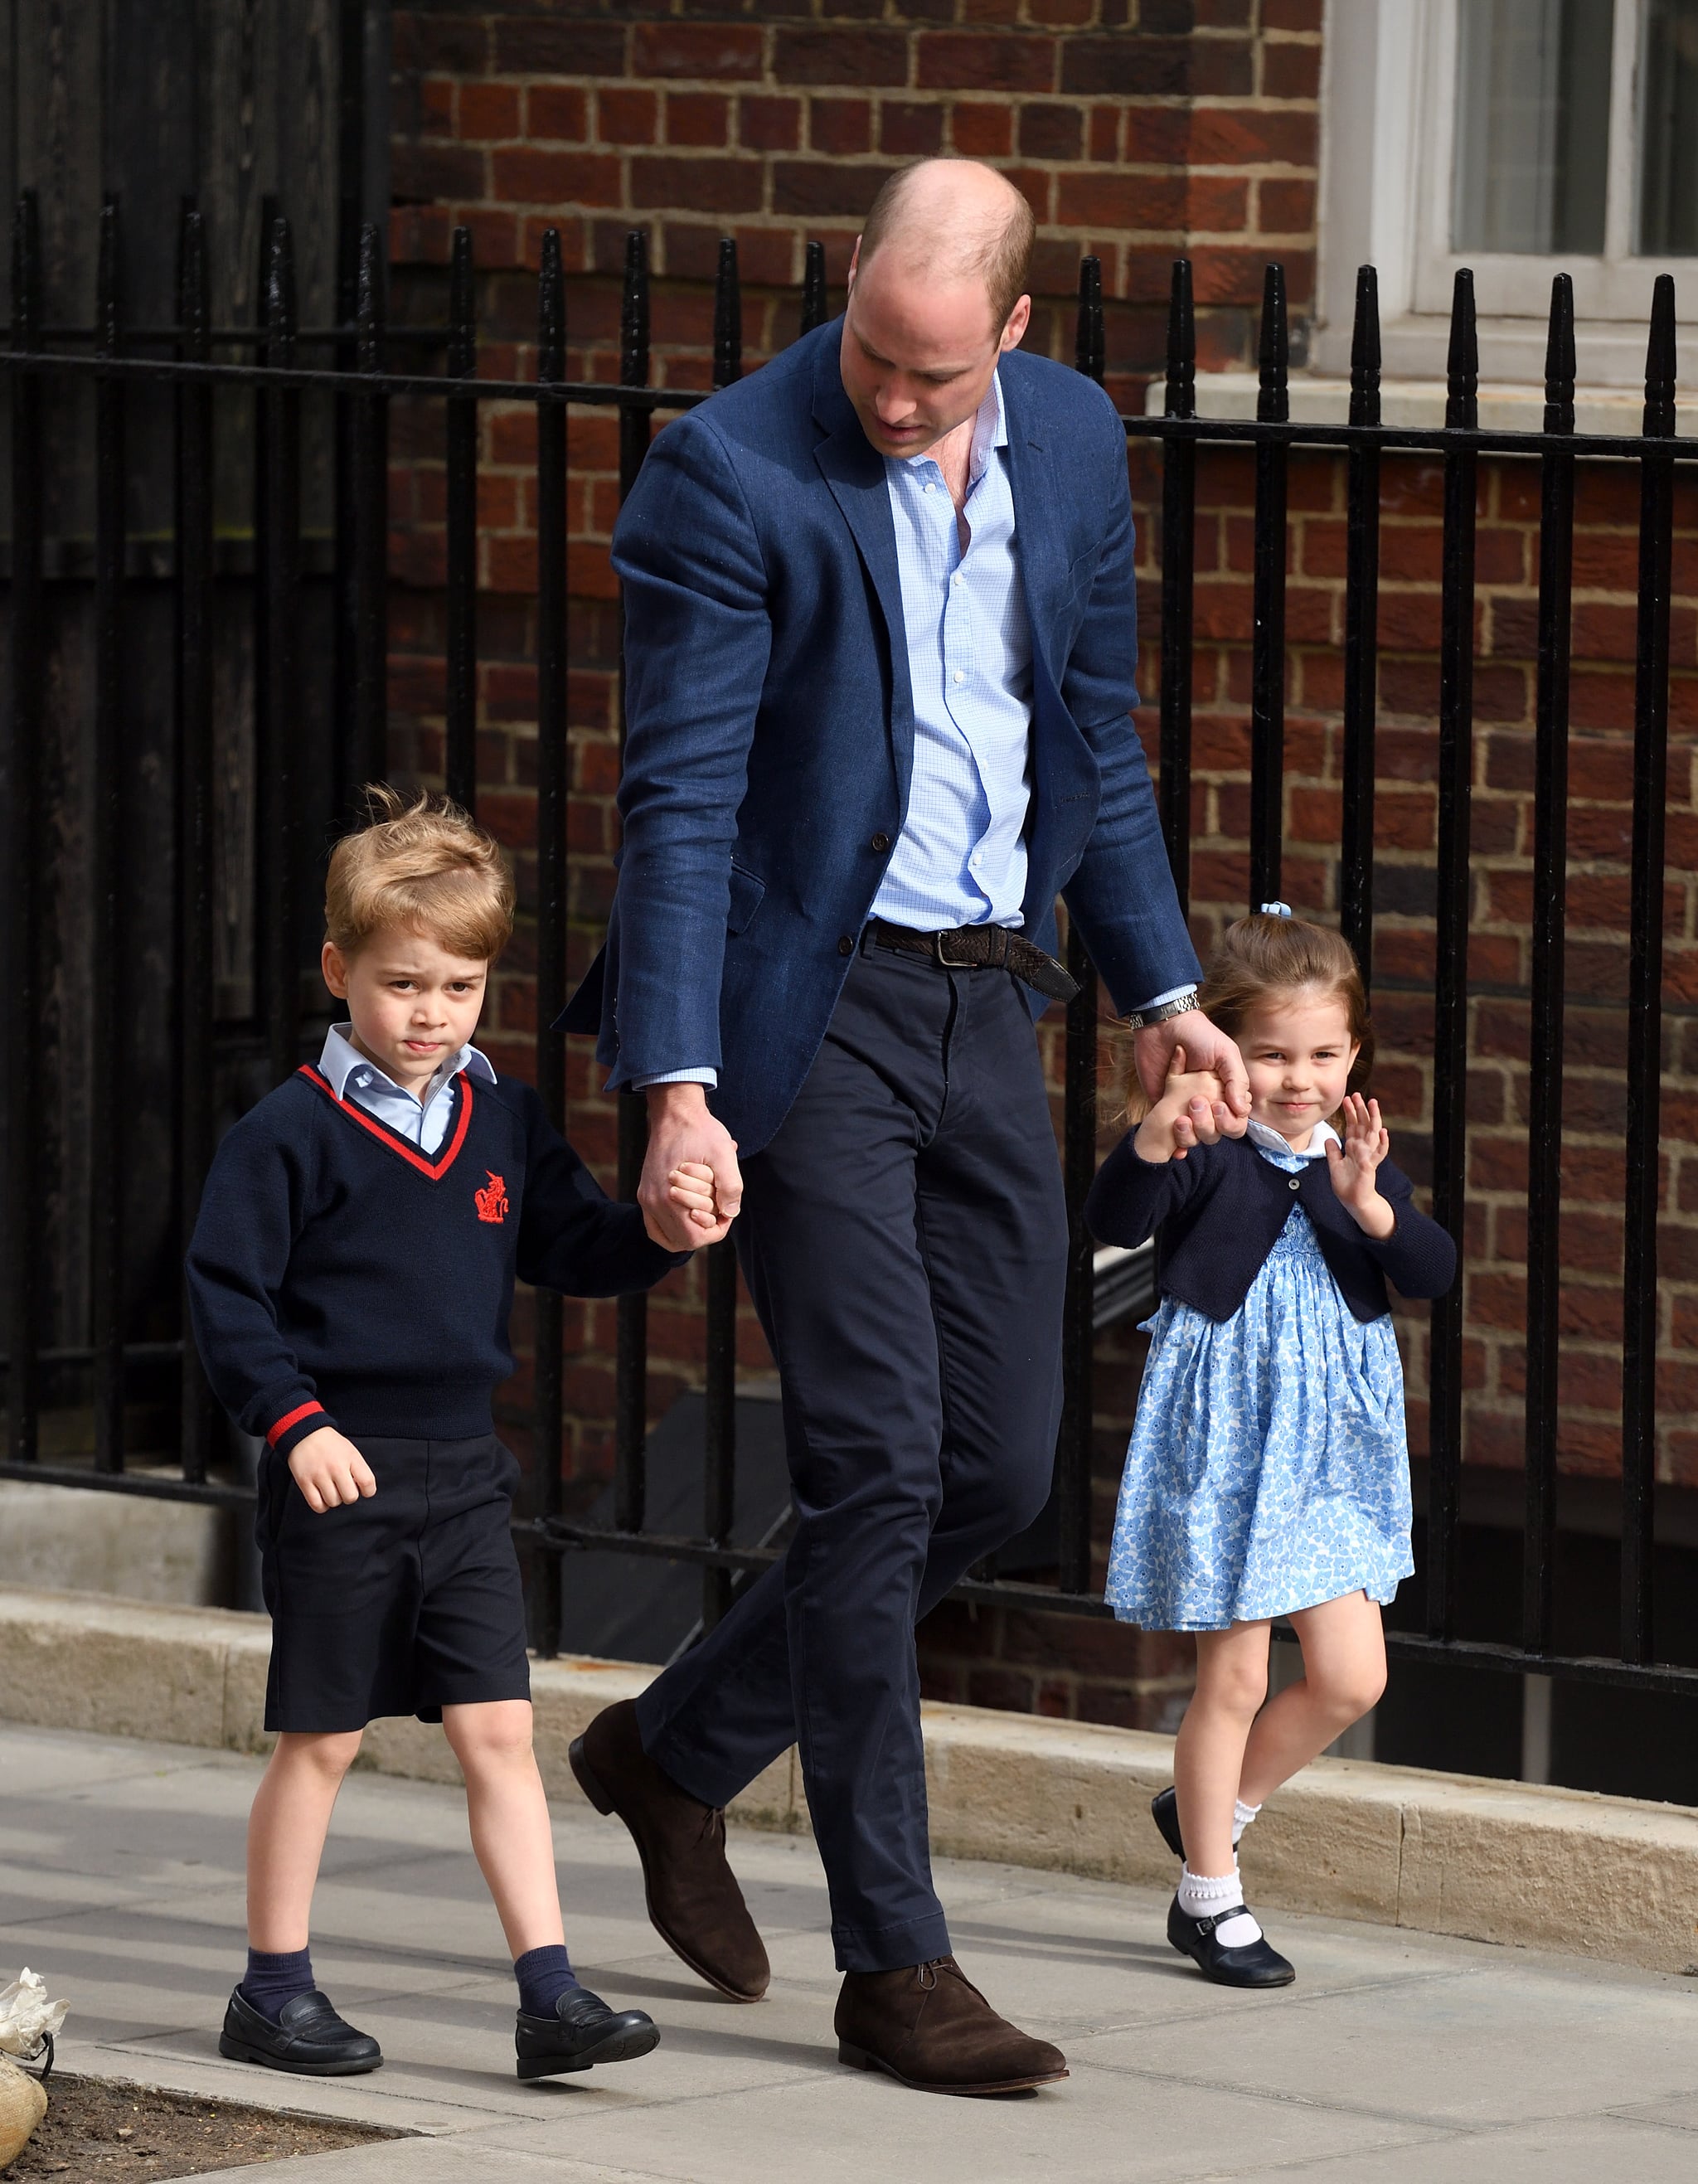 LONDON, ENGLAND - APRIL 23:  Prince William, Duke of Cambridge arrives with Prince George and Princess Charlotte at the Lindo Wing after Catherine, Duchess of Cambridge gave birth to their son at St Mary's Hospital  on April 23, 2018 in London, England. The Duchess safely delivered a boy at 11:01 am, weighing 8lbs 7oz, who will be fifth in line to the throne.  (Photo by Karwai Tang/WireImage)